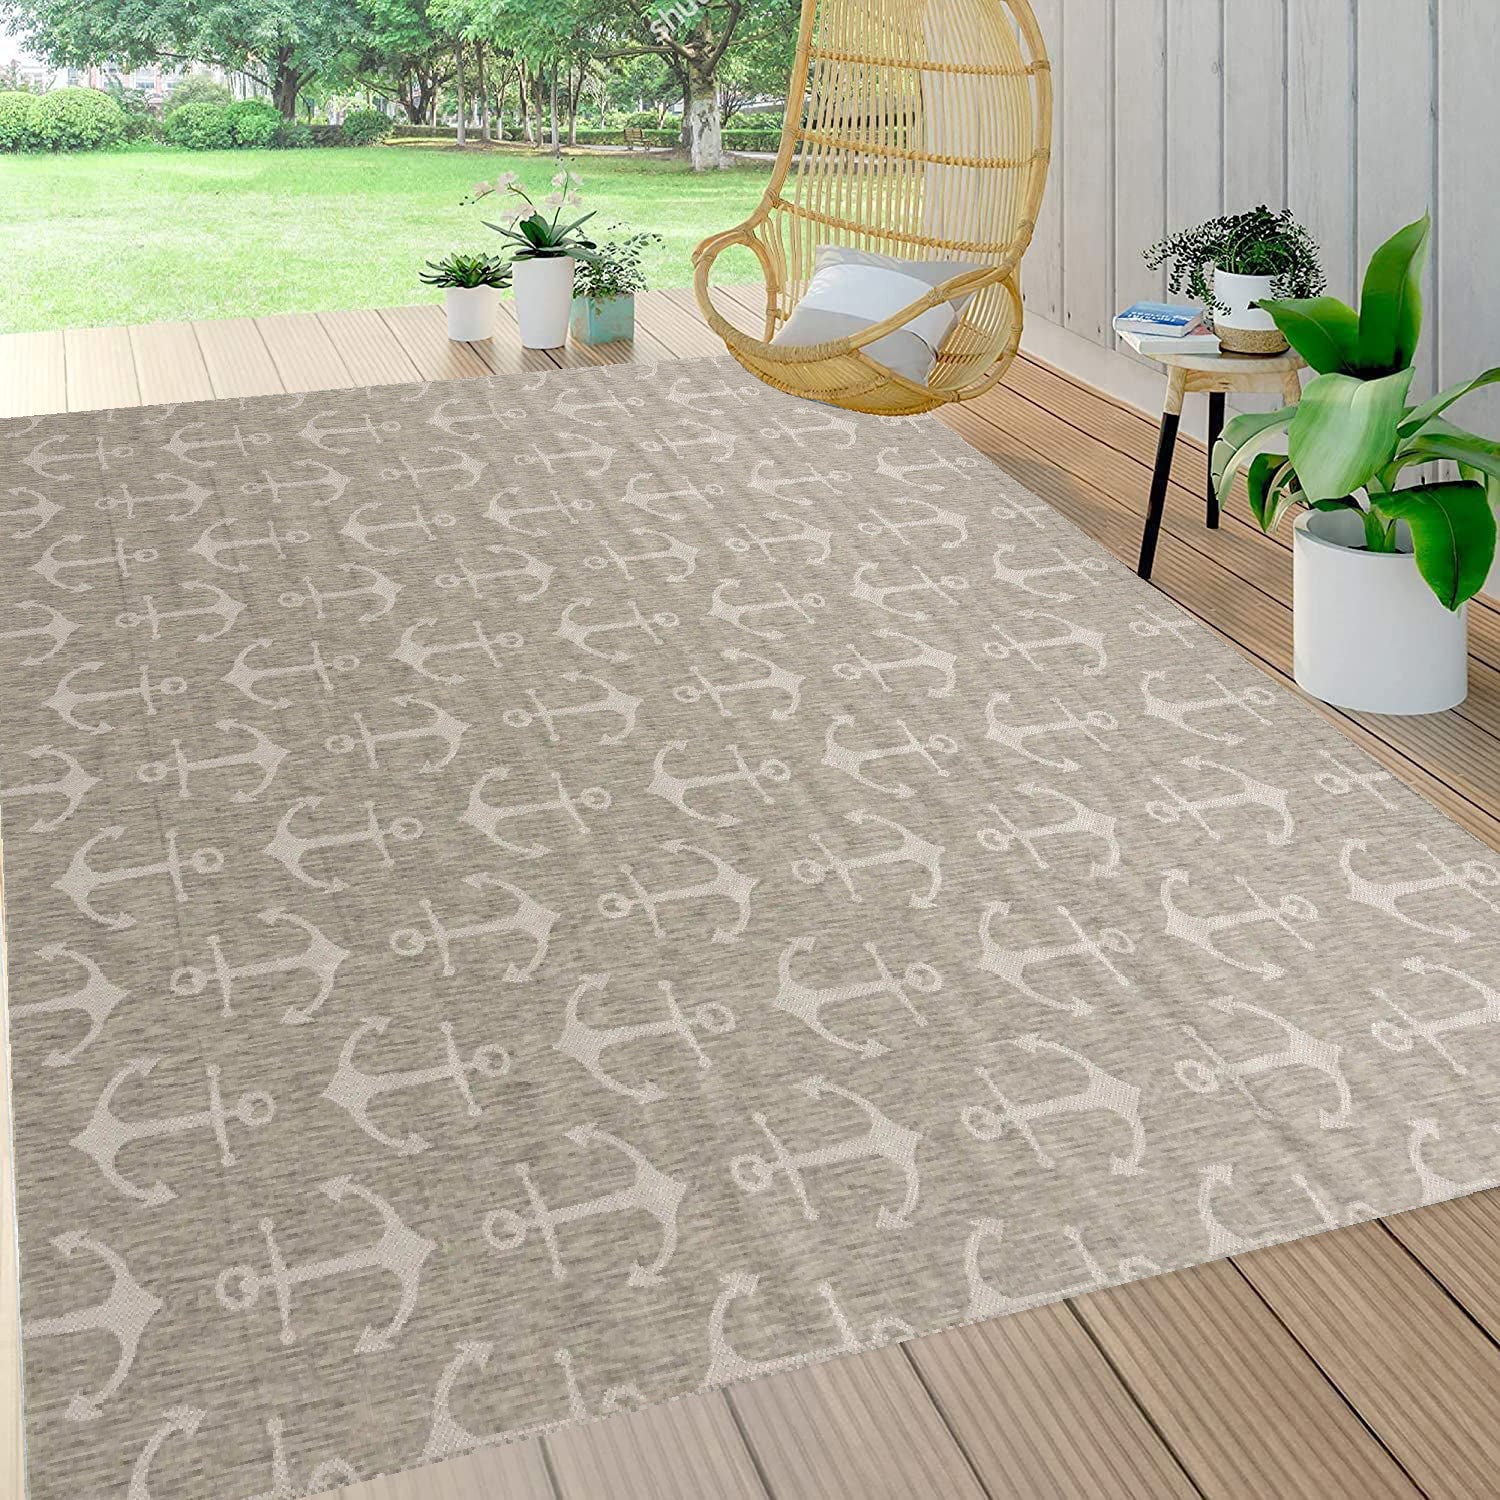 Outdoor Rug for Patio, Deck, Backyard KGORGE Store